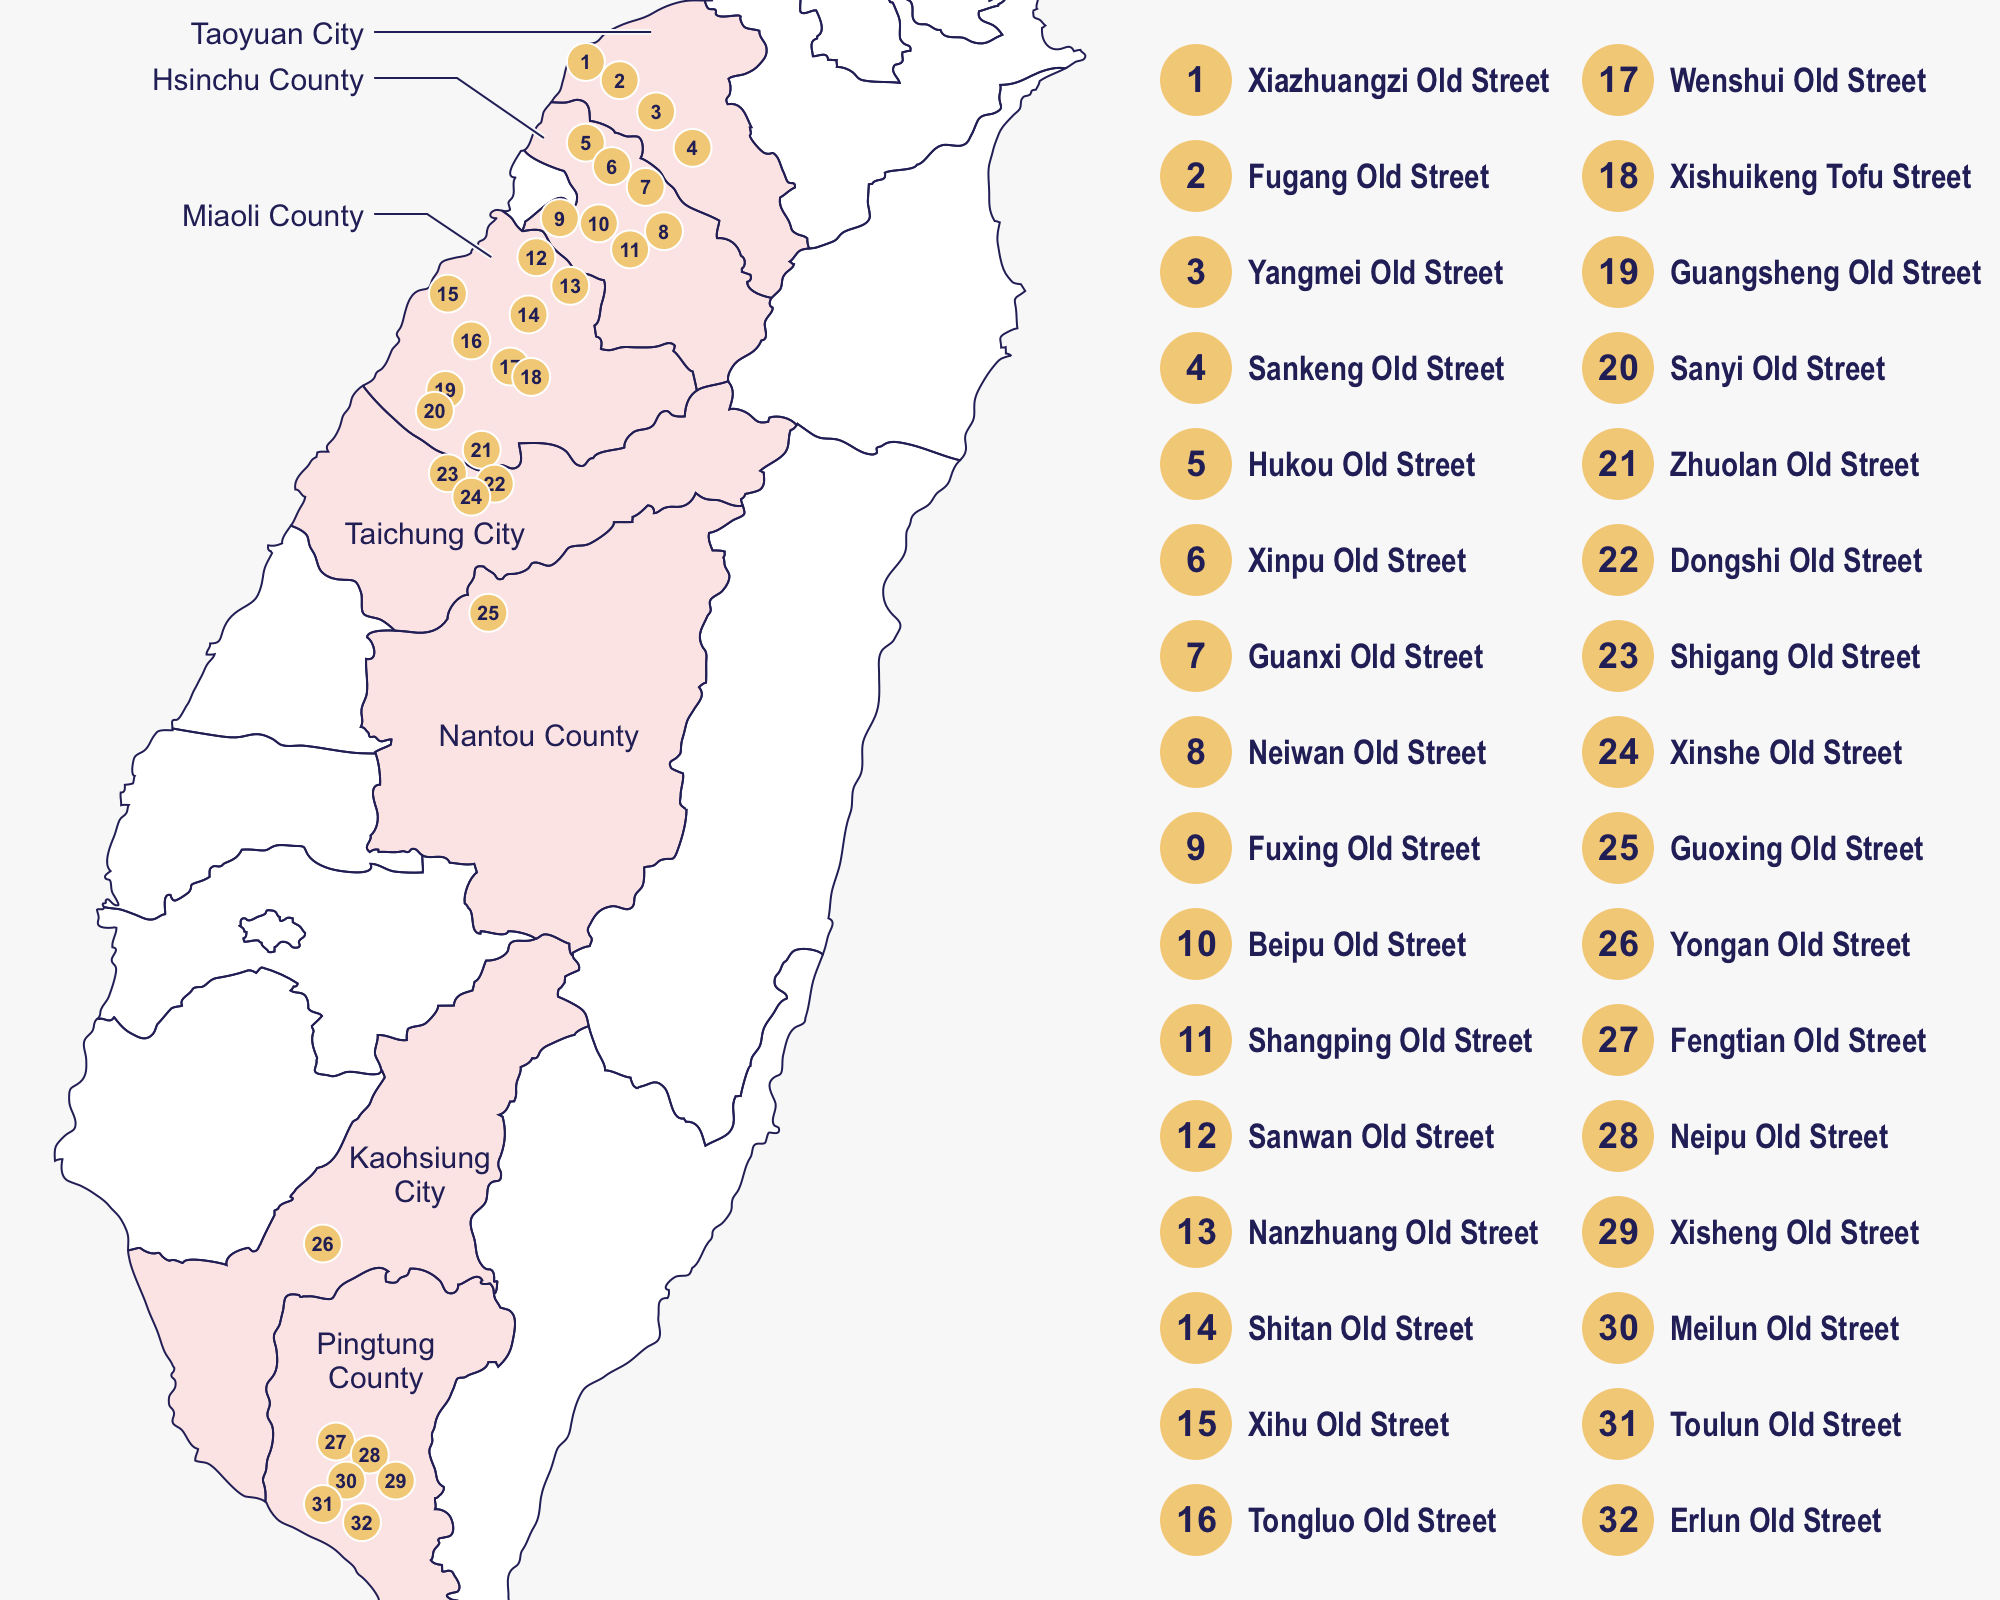 Map of all Hakka old streets in Taiwan